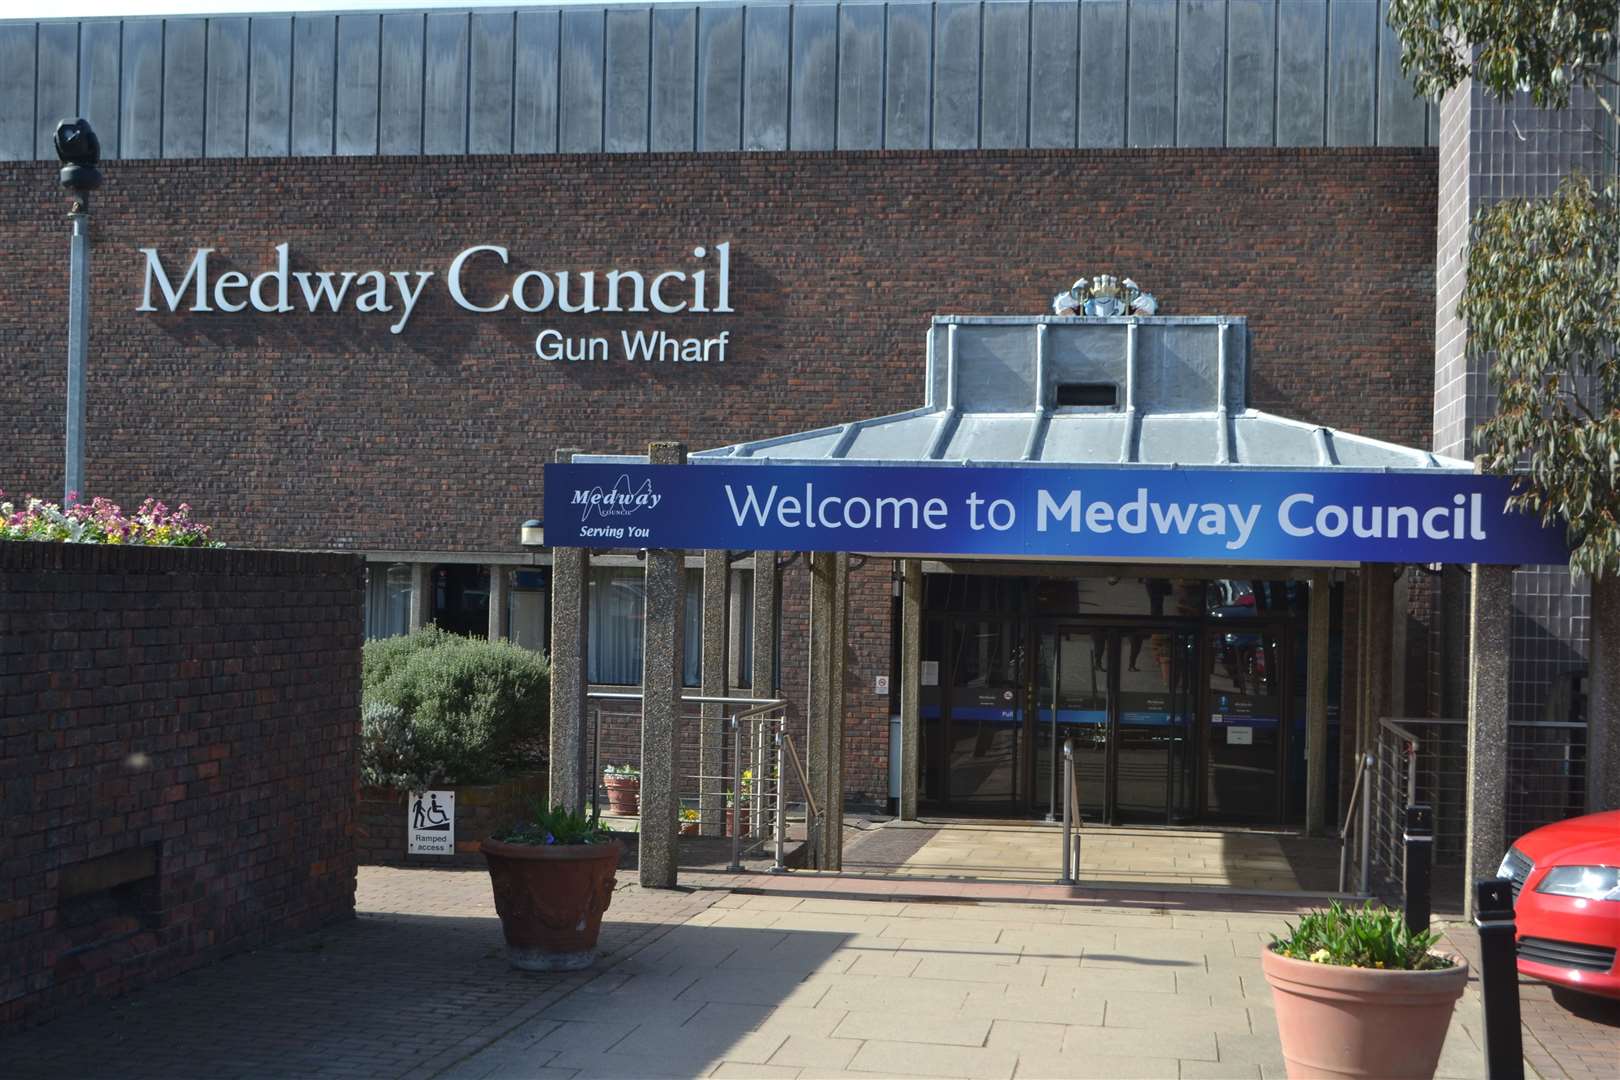 Council leader Alan Jarrett says Medway will apply for city status again